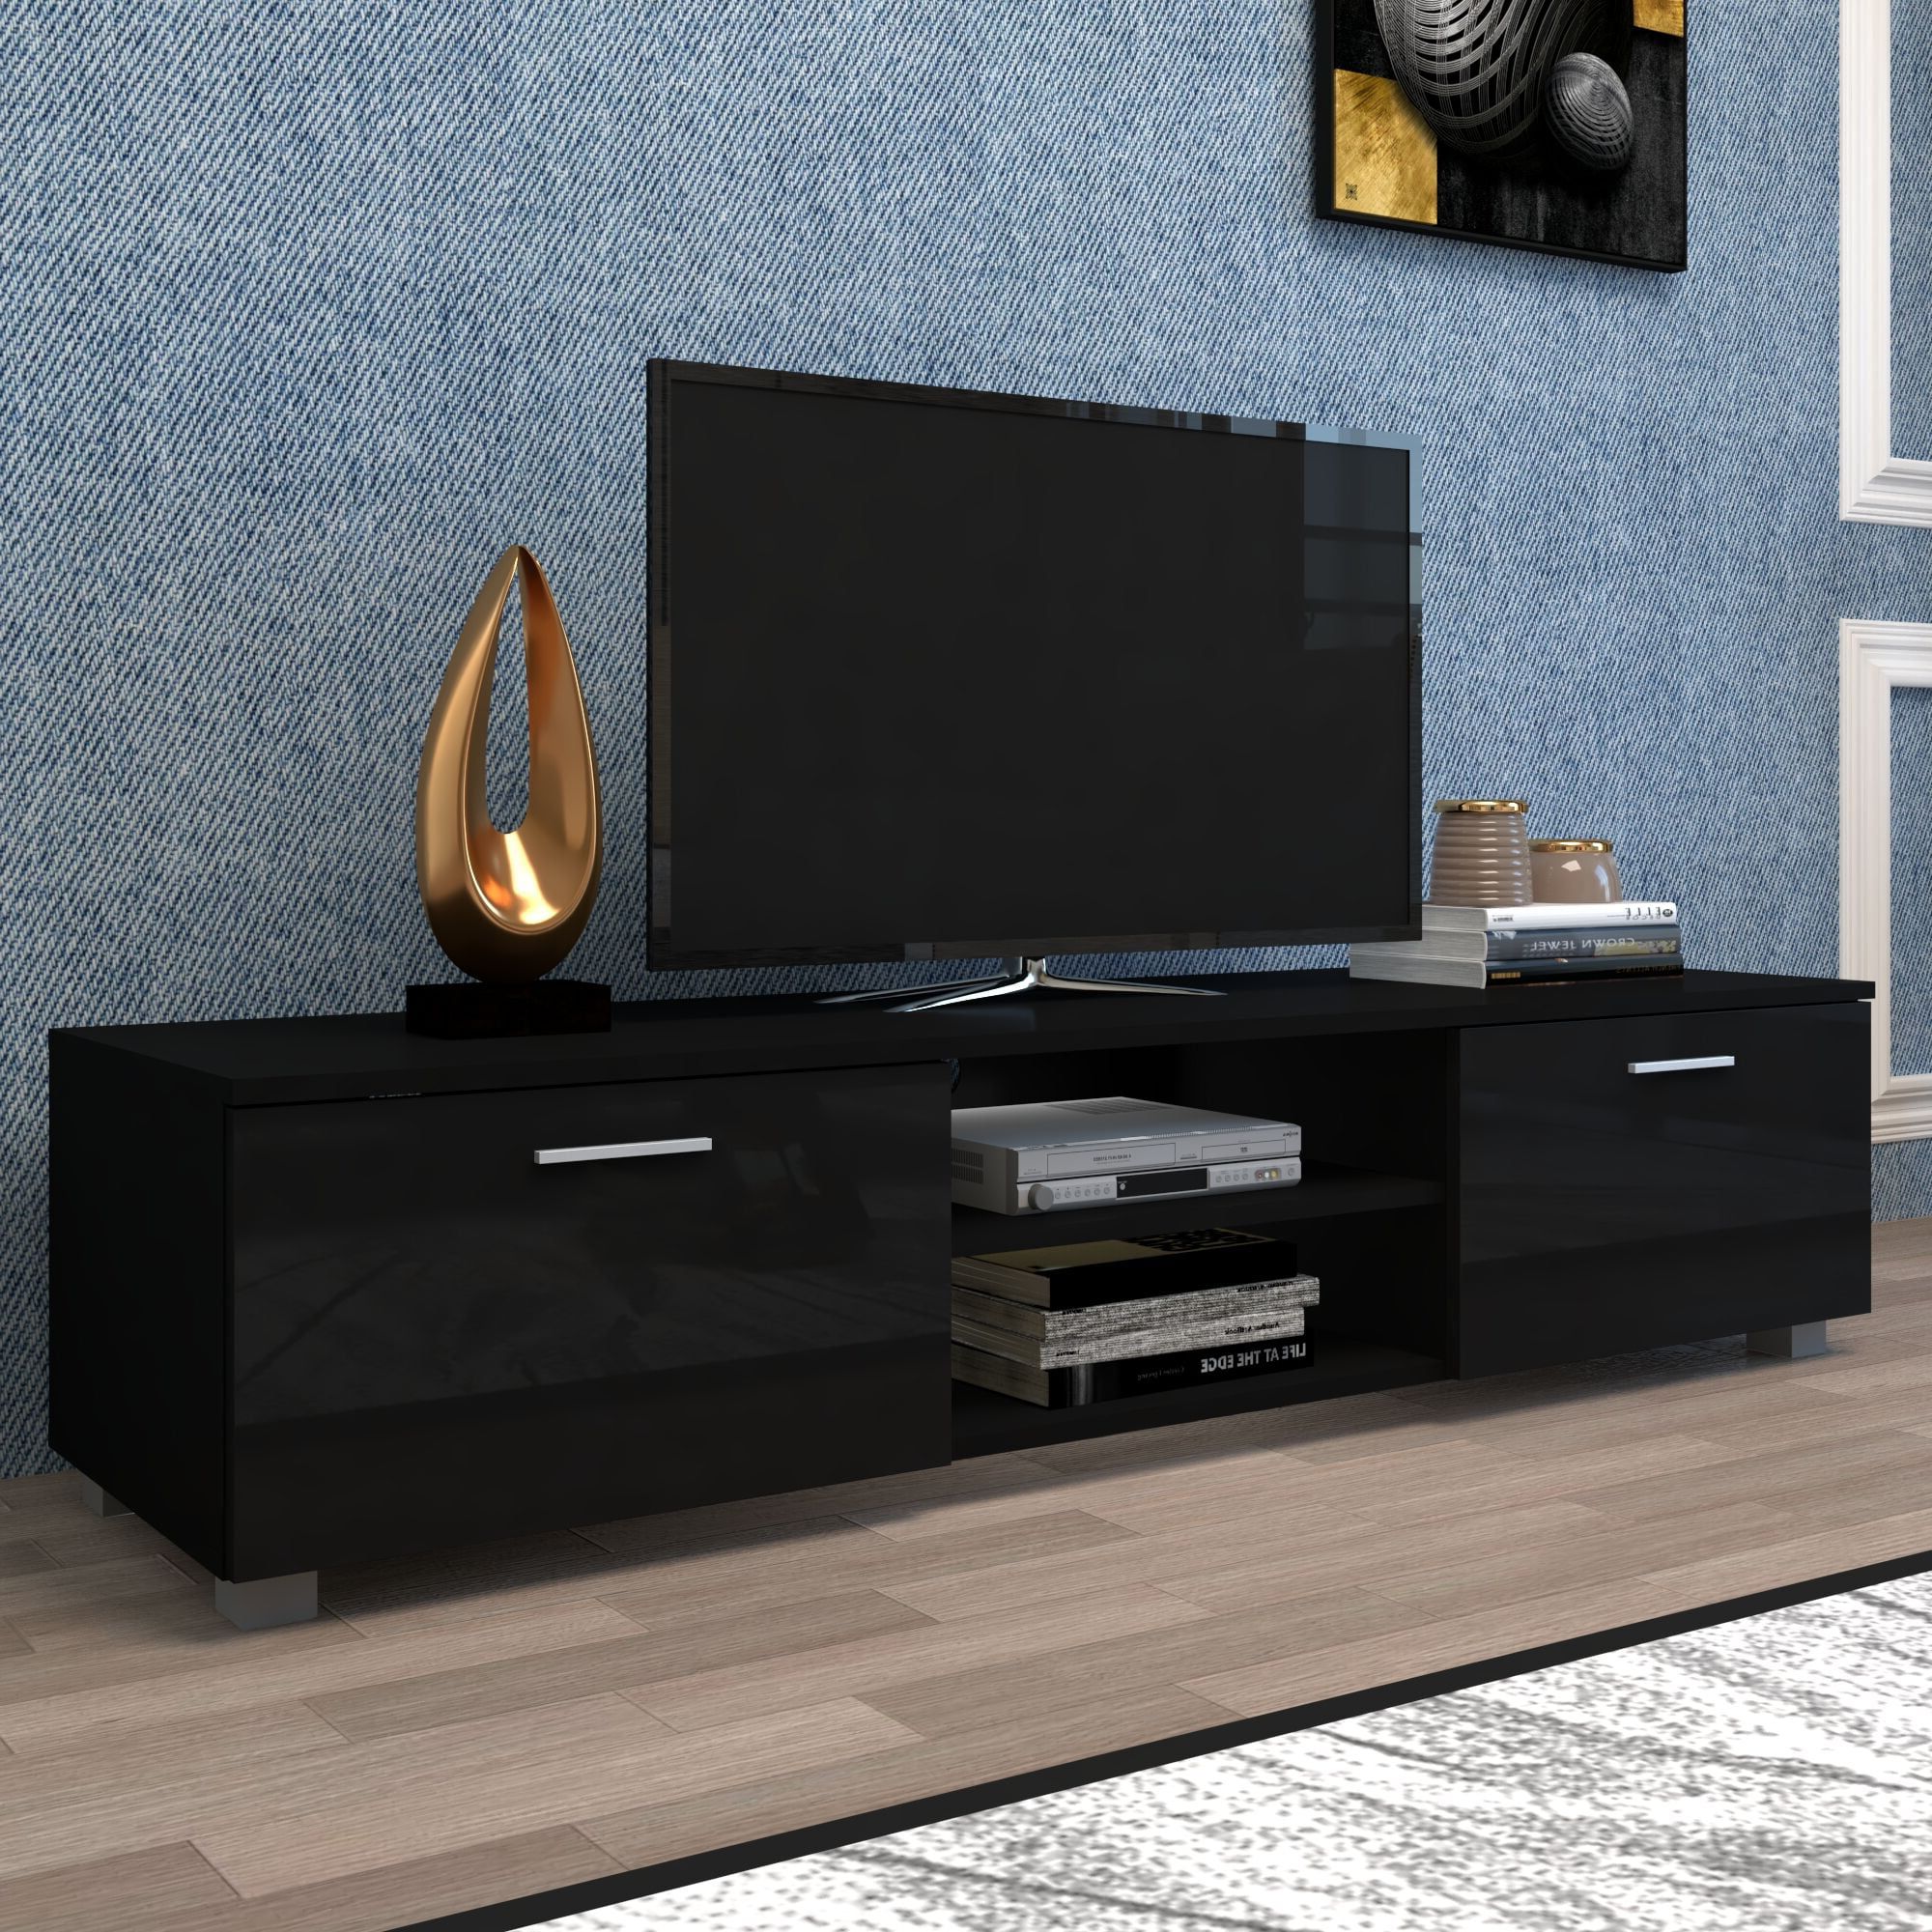 Black Modern Tv Stand For 70 Inch Tv Stands, Media Console Inside Well Known Media Entertainment Center Tv Stands (View 7 of 15)